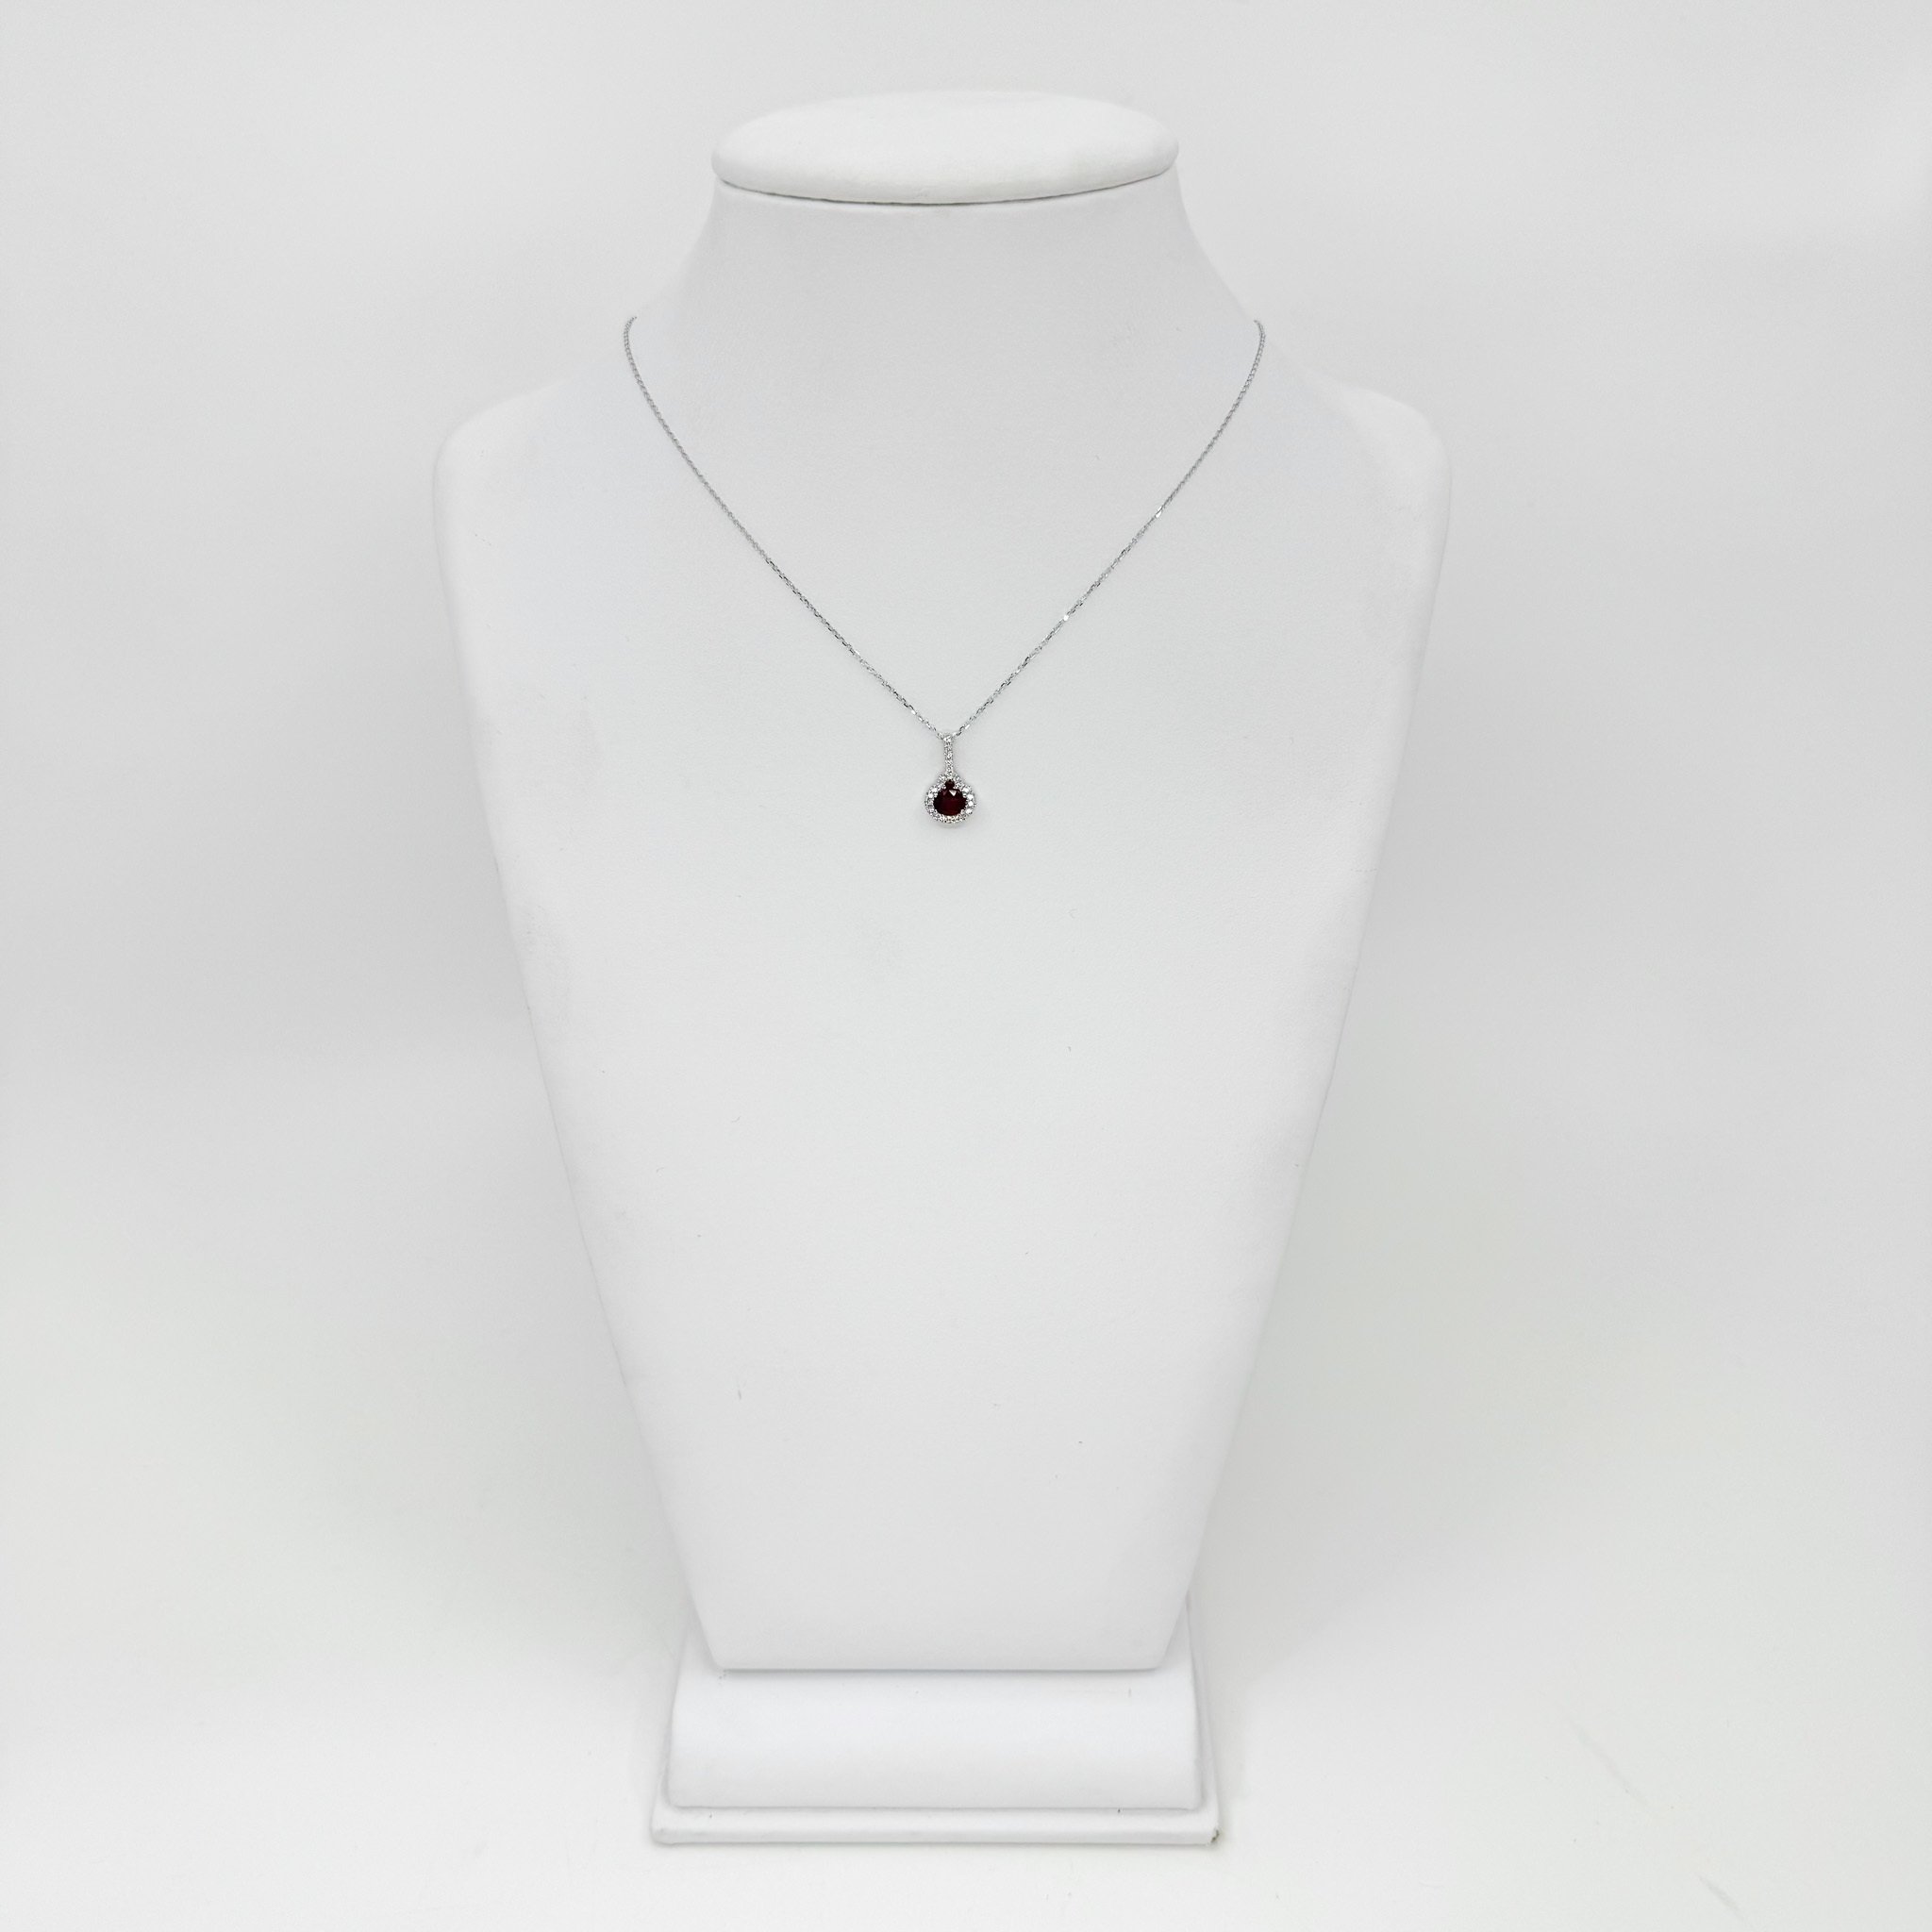 Ruby and Diamond pendant set in 14kw, Ruby 0.55ct, Diamond 0.10ct.